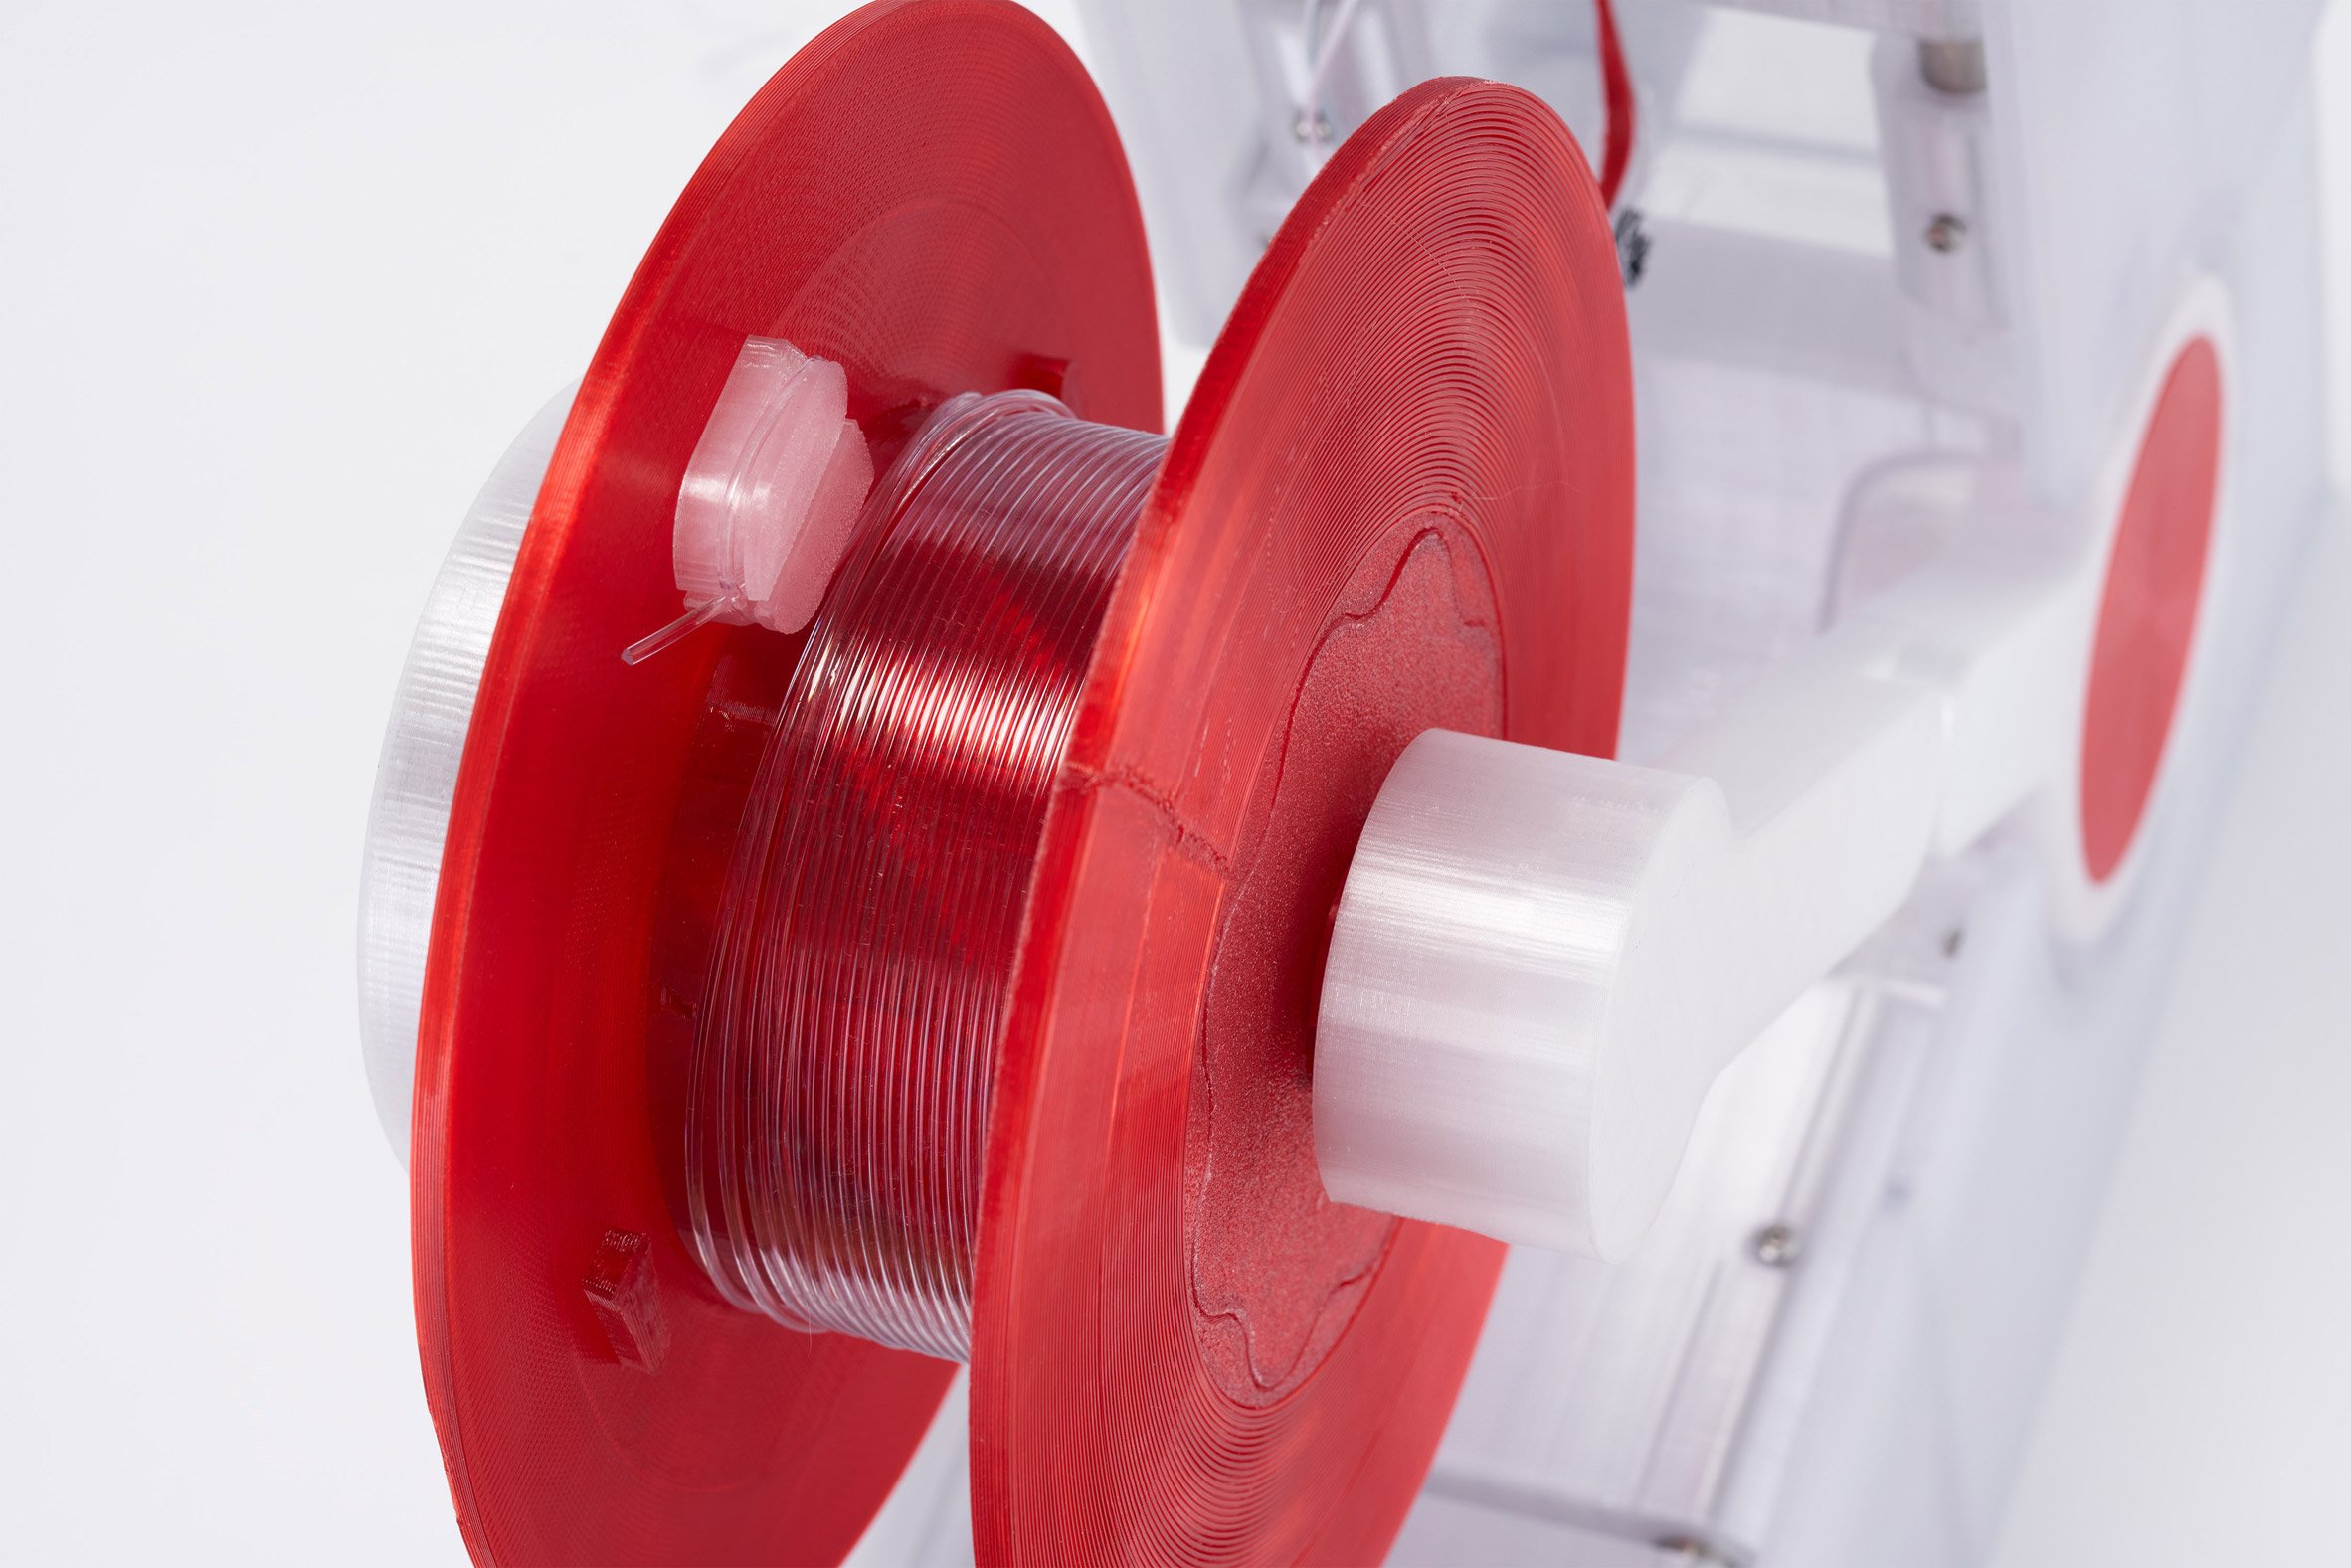 Recycled plastic filament on a red spool in recycling machine by Reiten Cheng